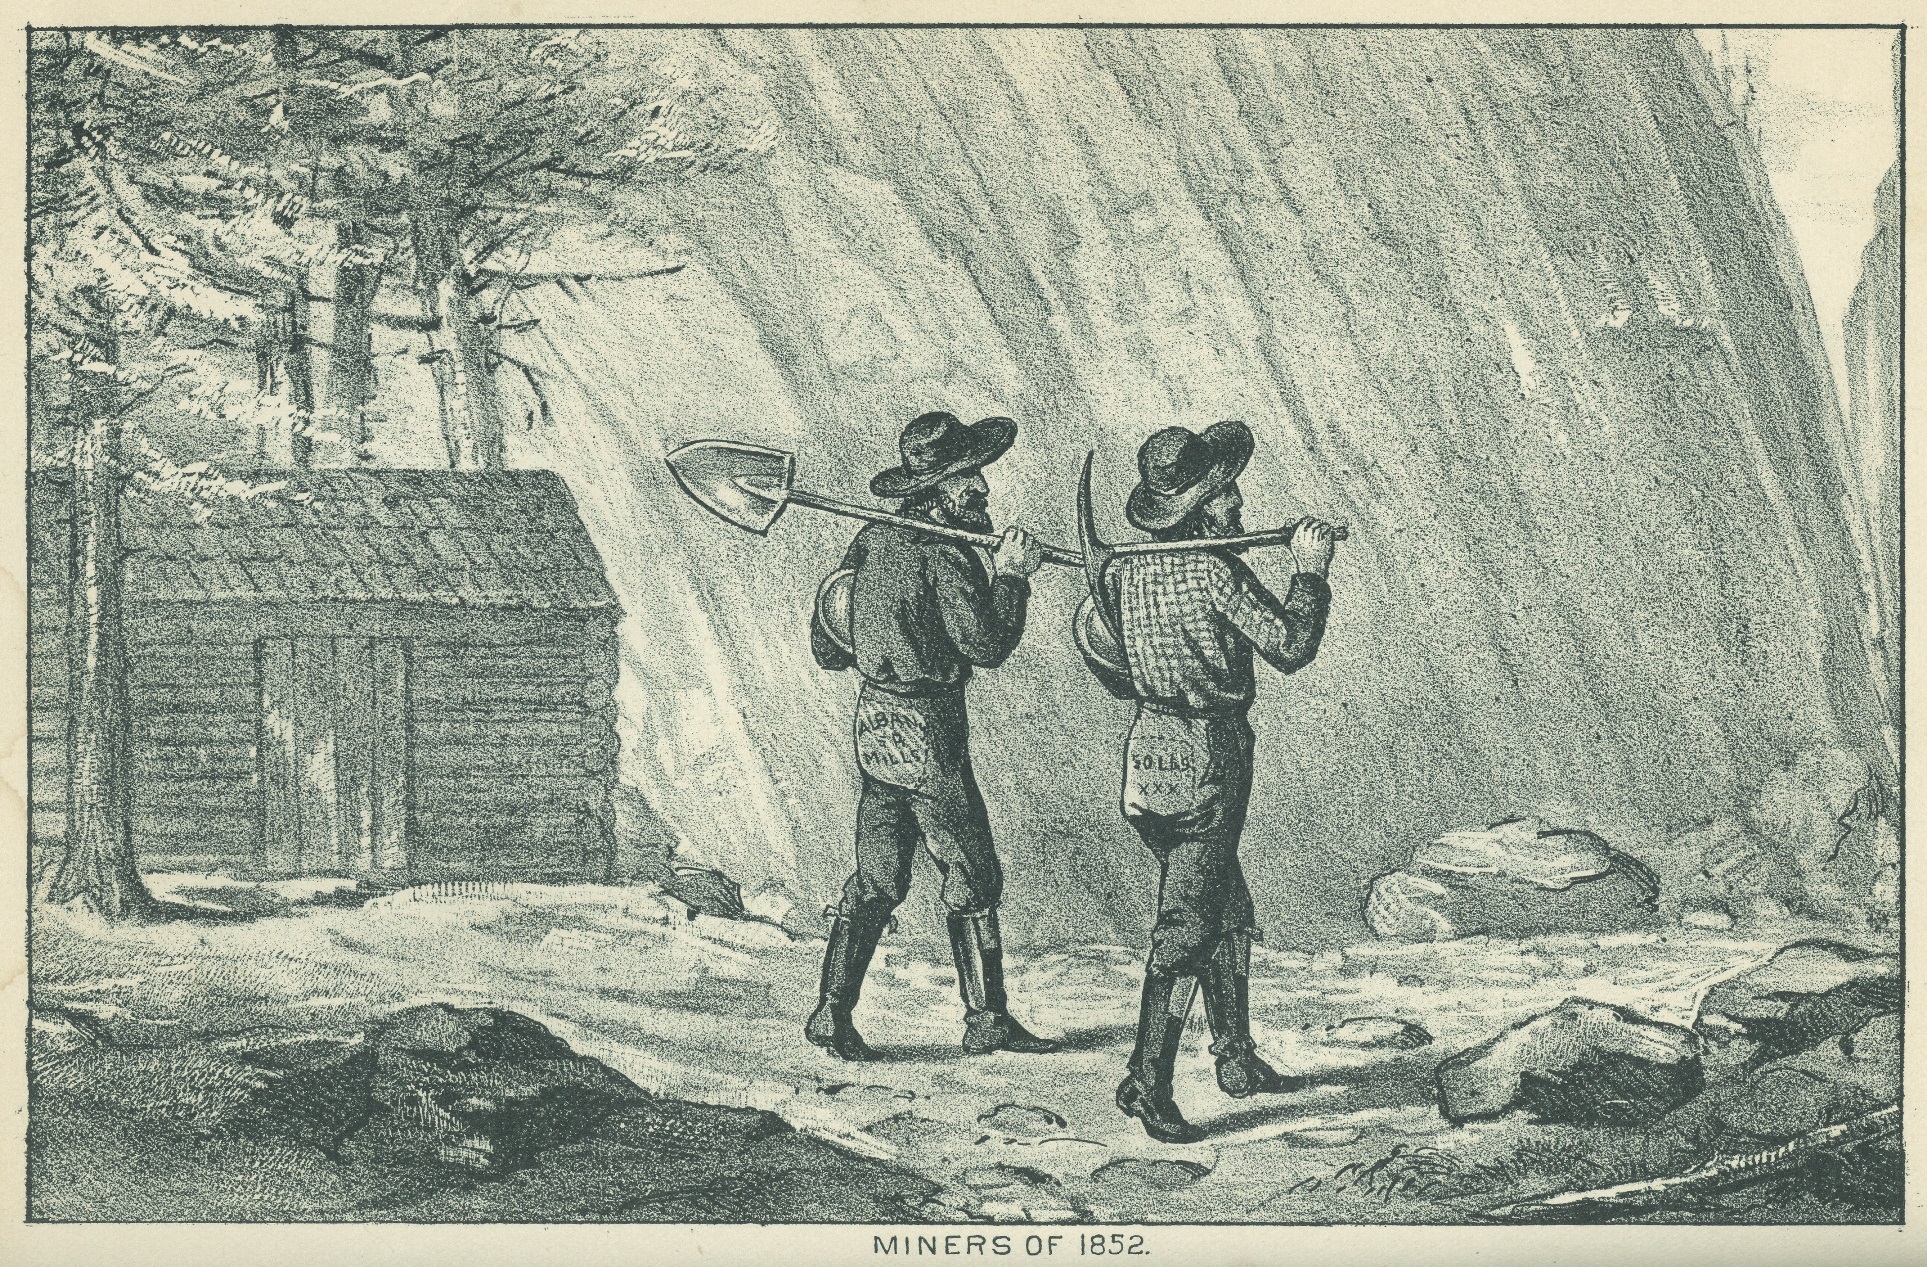 Miners, Reminiscences of an Old Timer, 1889